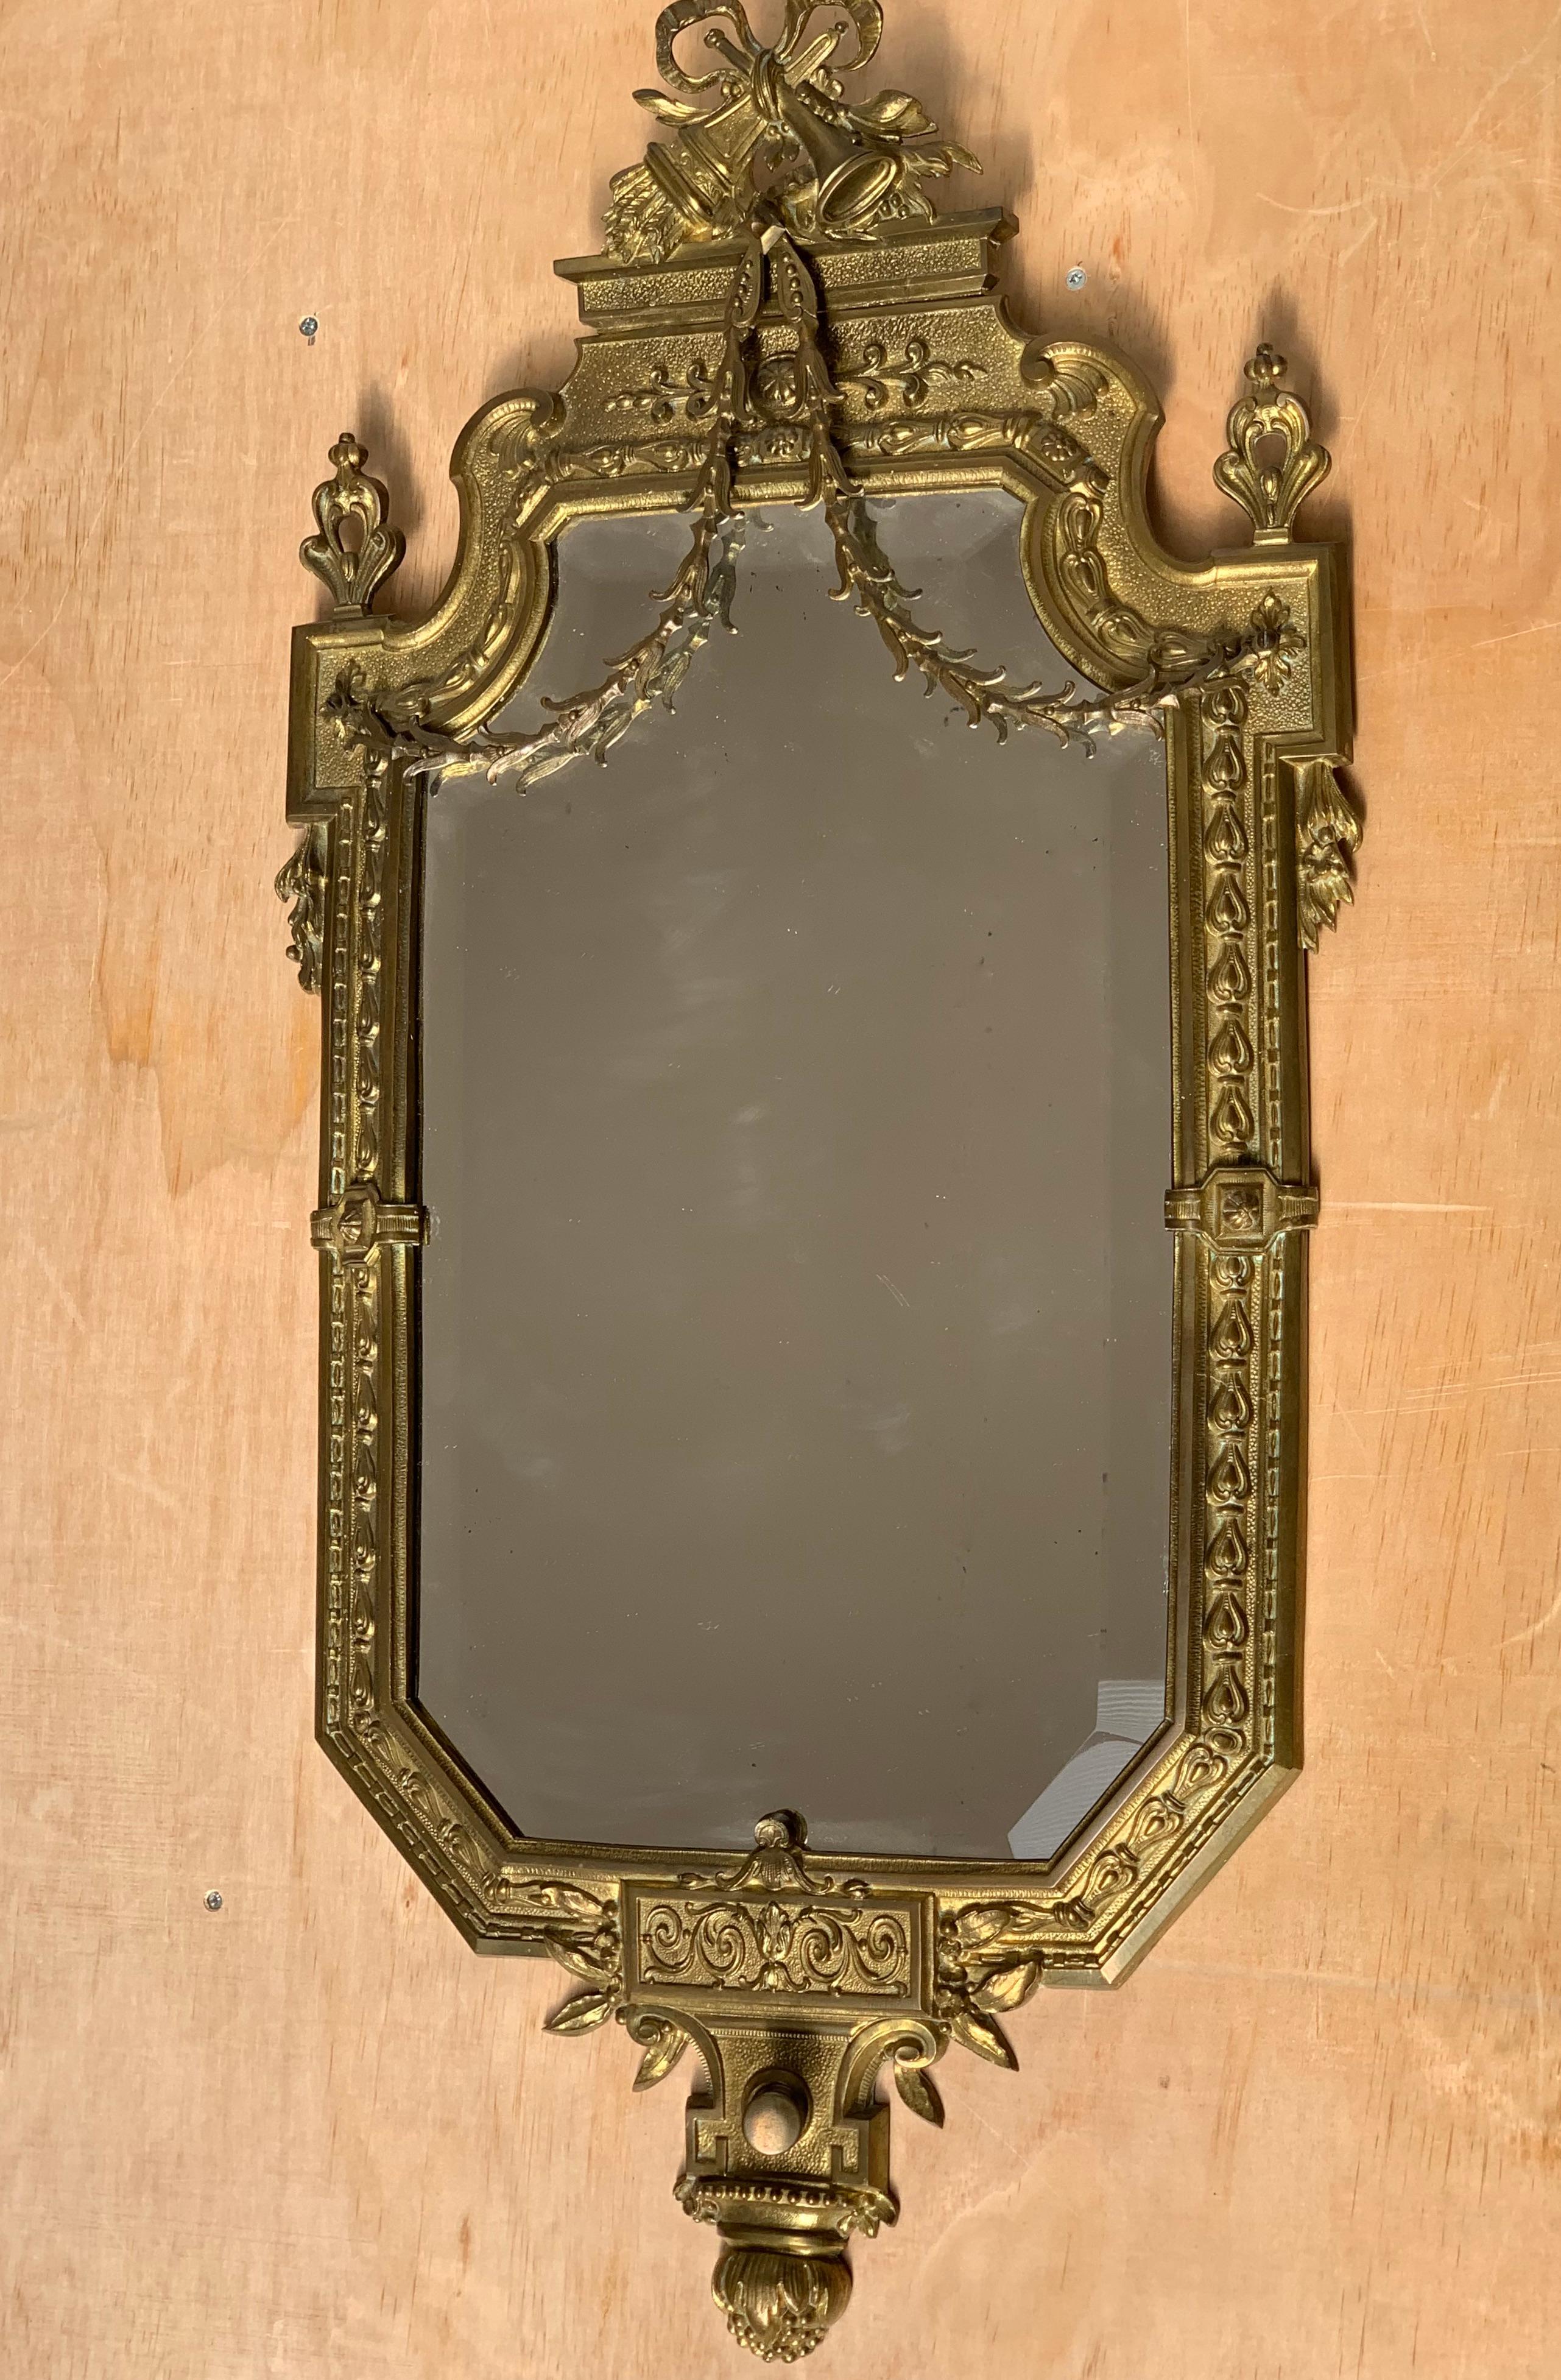 Handcrafted bronze frame and beveled glass wall mirror. 

Have you also wondered why not more people around the globe are buying antiques for the decoration of their homes and offices? The workmanship that it took to create the top quality and